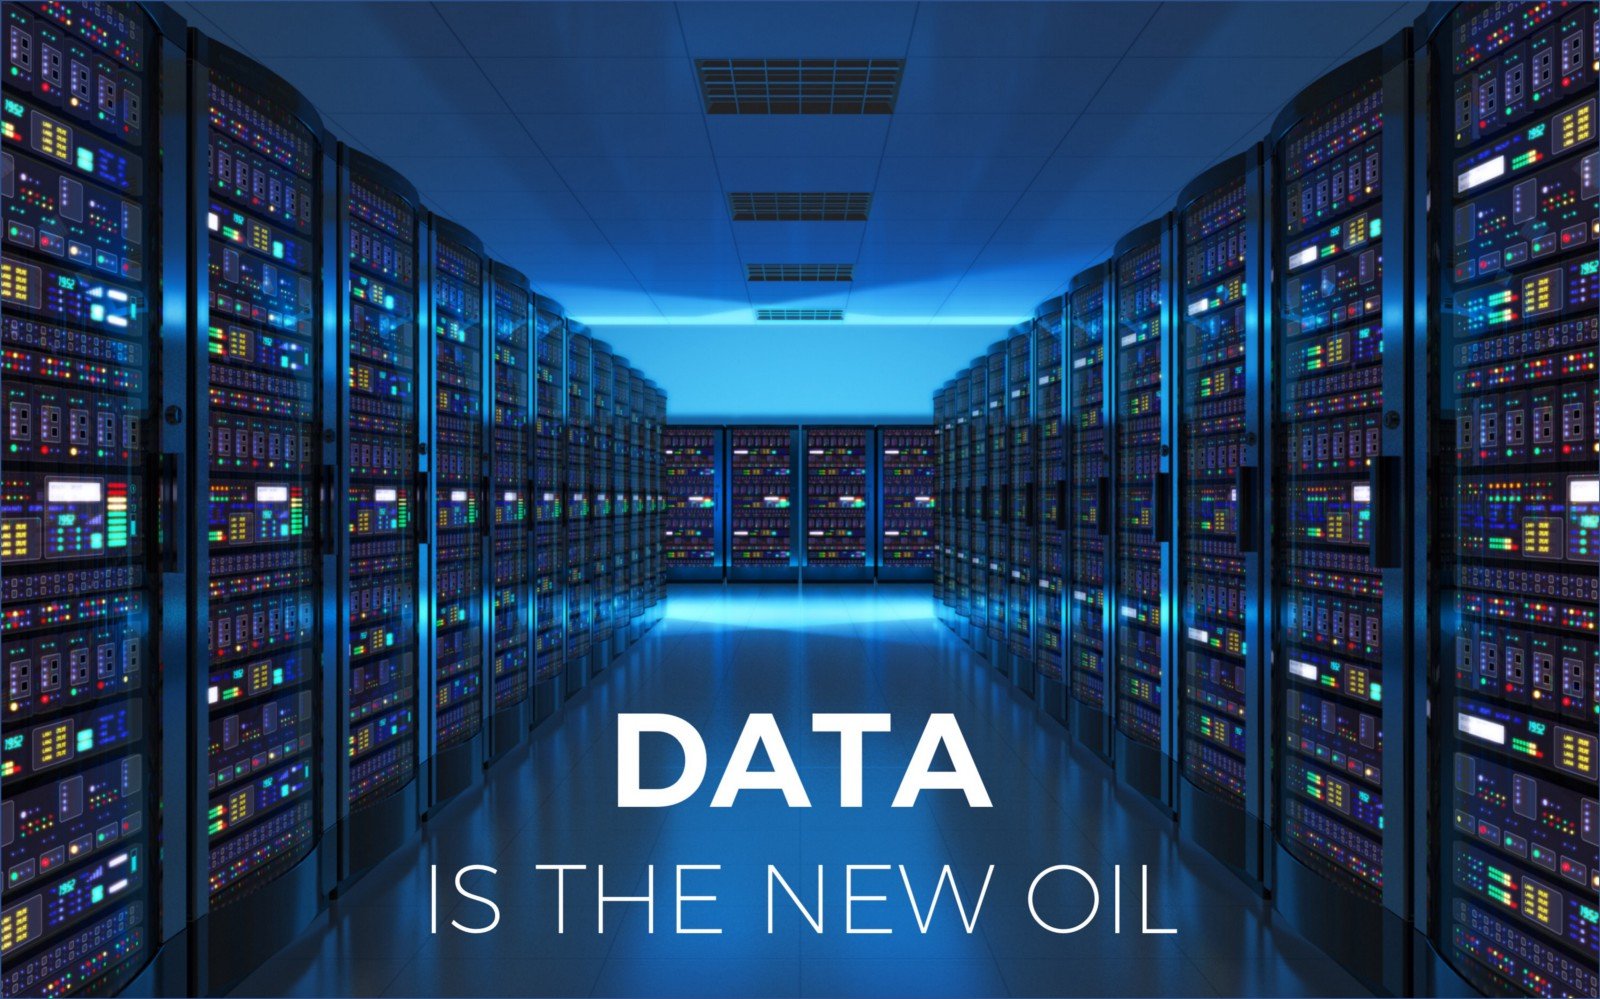 data is the new oil - Salesflare sales deck